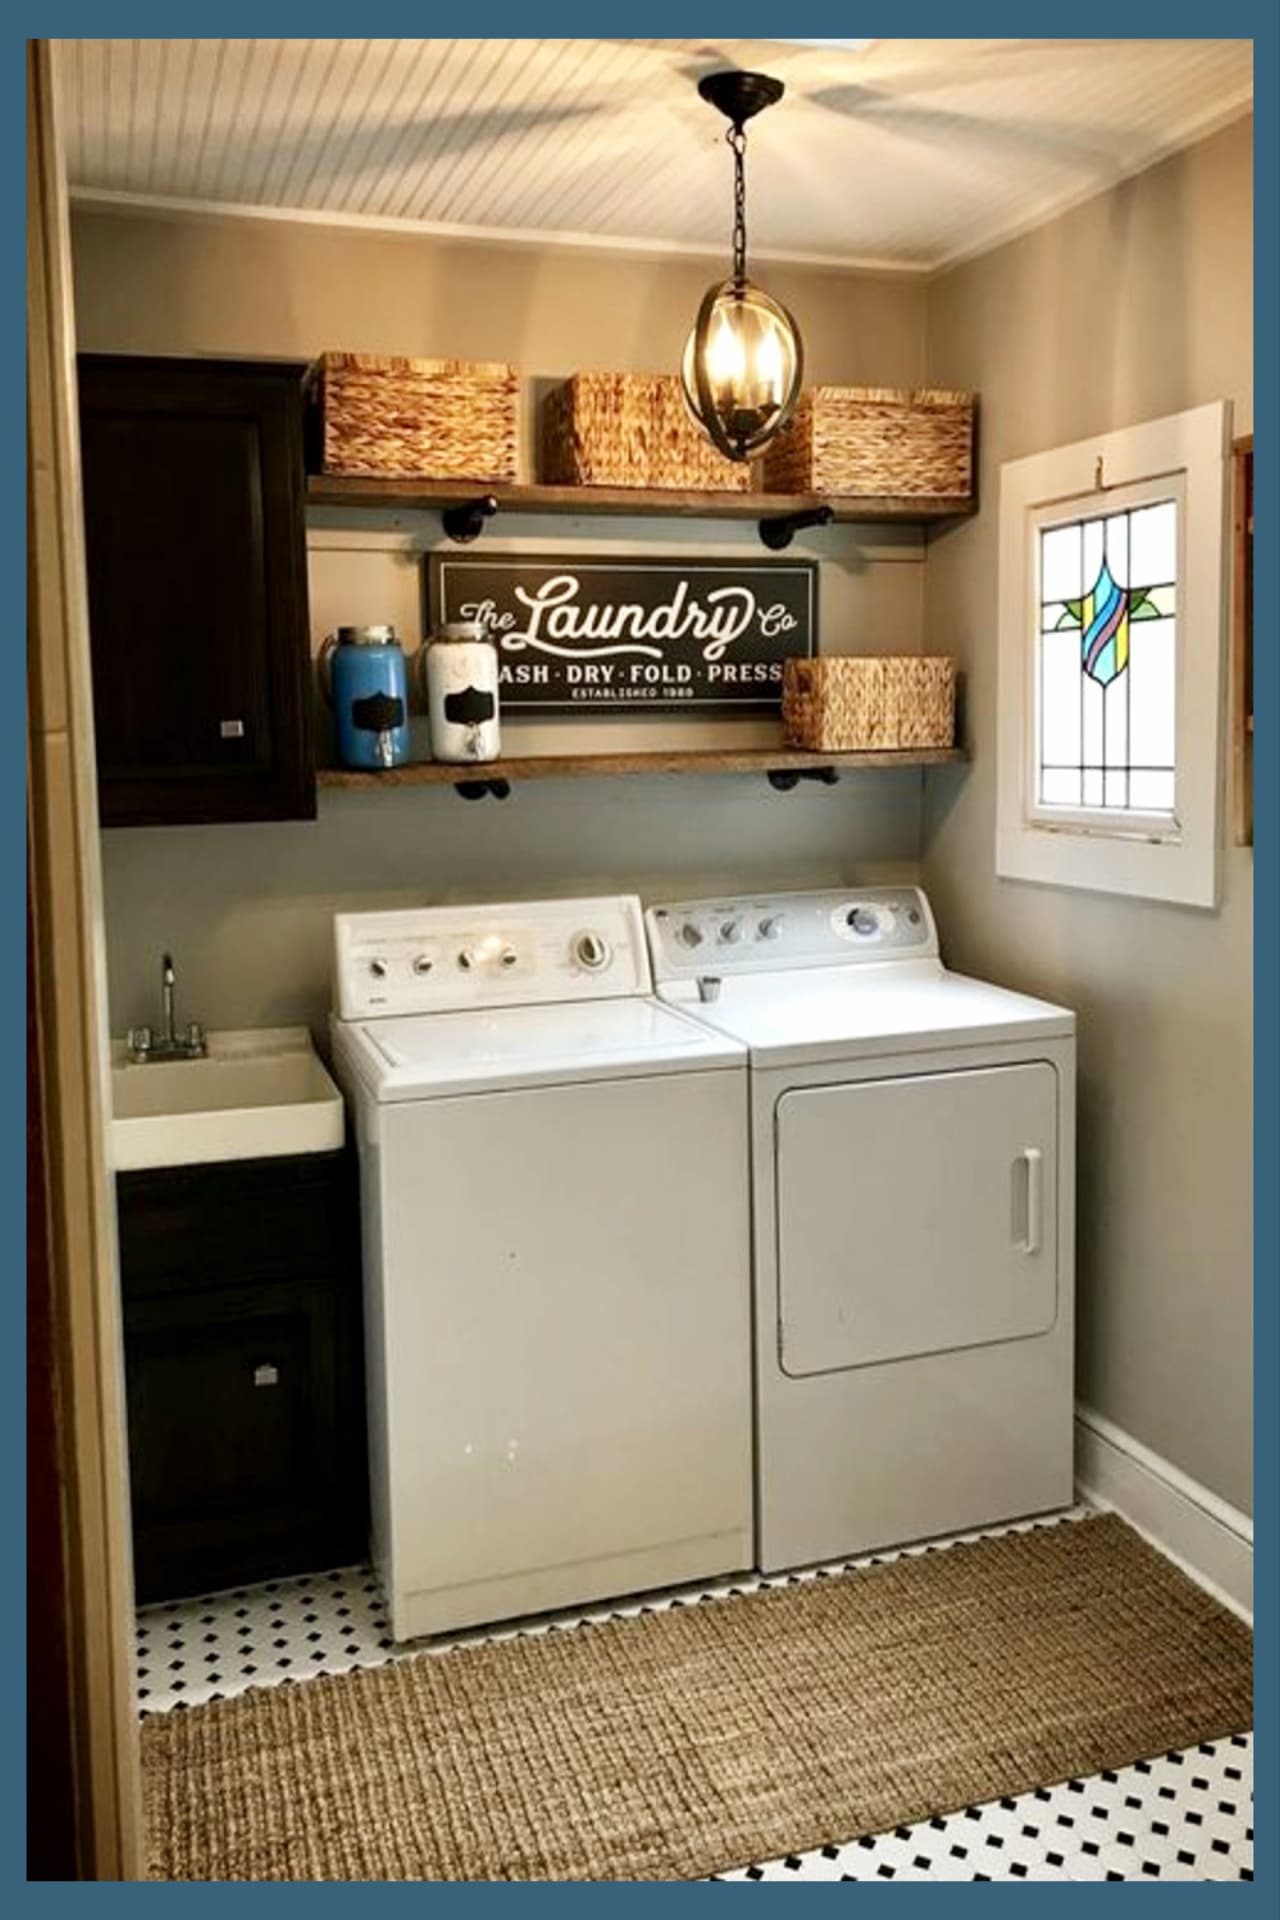 Small Laundry Room Ideas Space Saving Ideas for Tiny Laundry Rooms (Creative and Simple DIY)